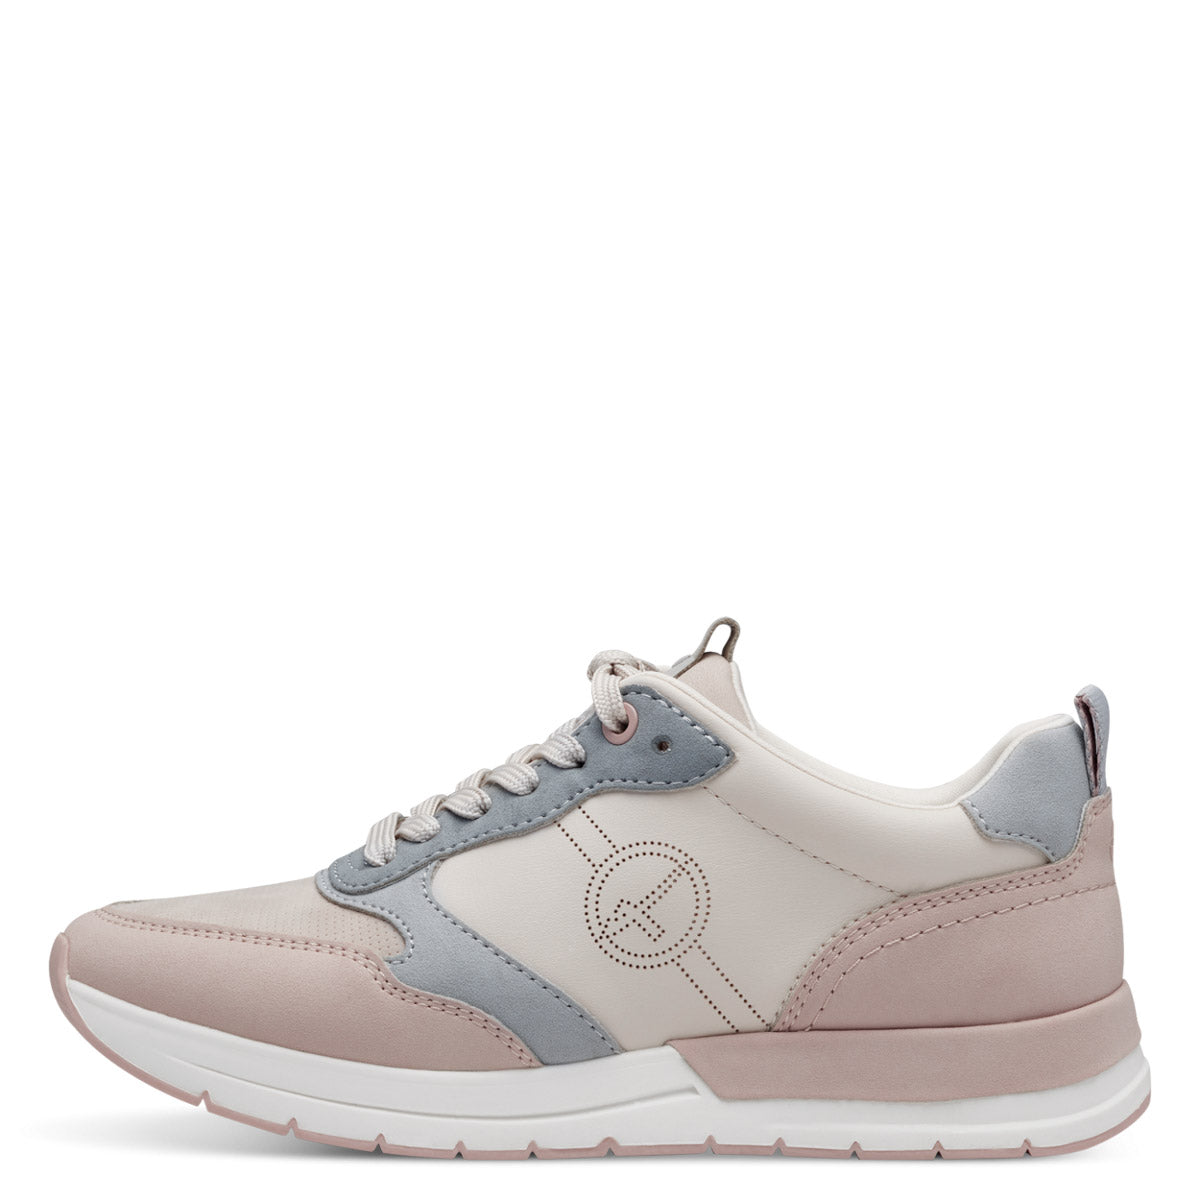 Front view of Tamaris pastel runner in ivory with light blue and pink accents.